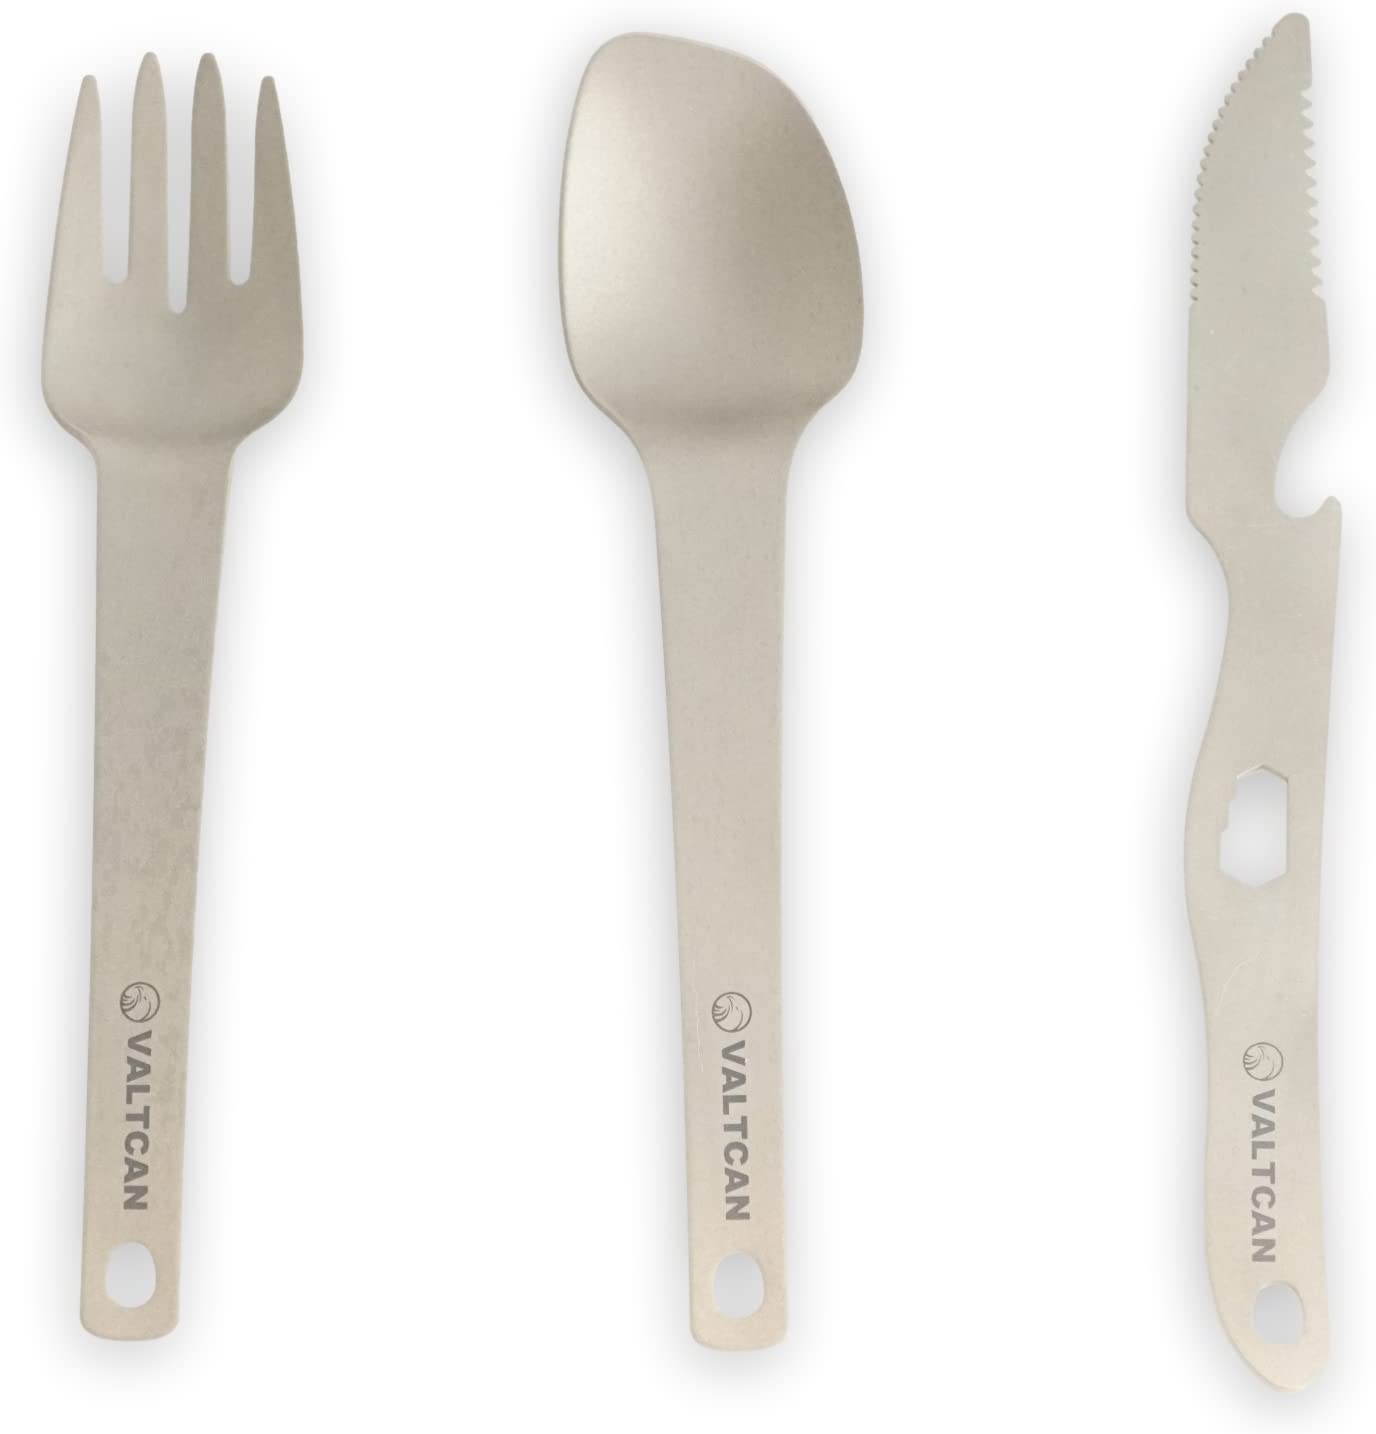 Titanium 3-Piece Cutlery Set (Knife, Fork and Spoon)